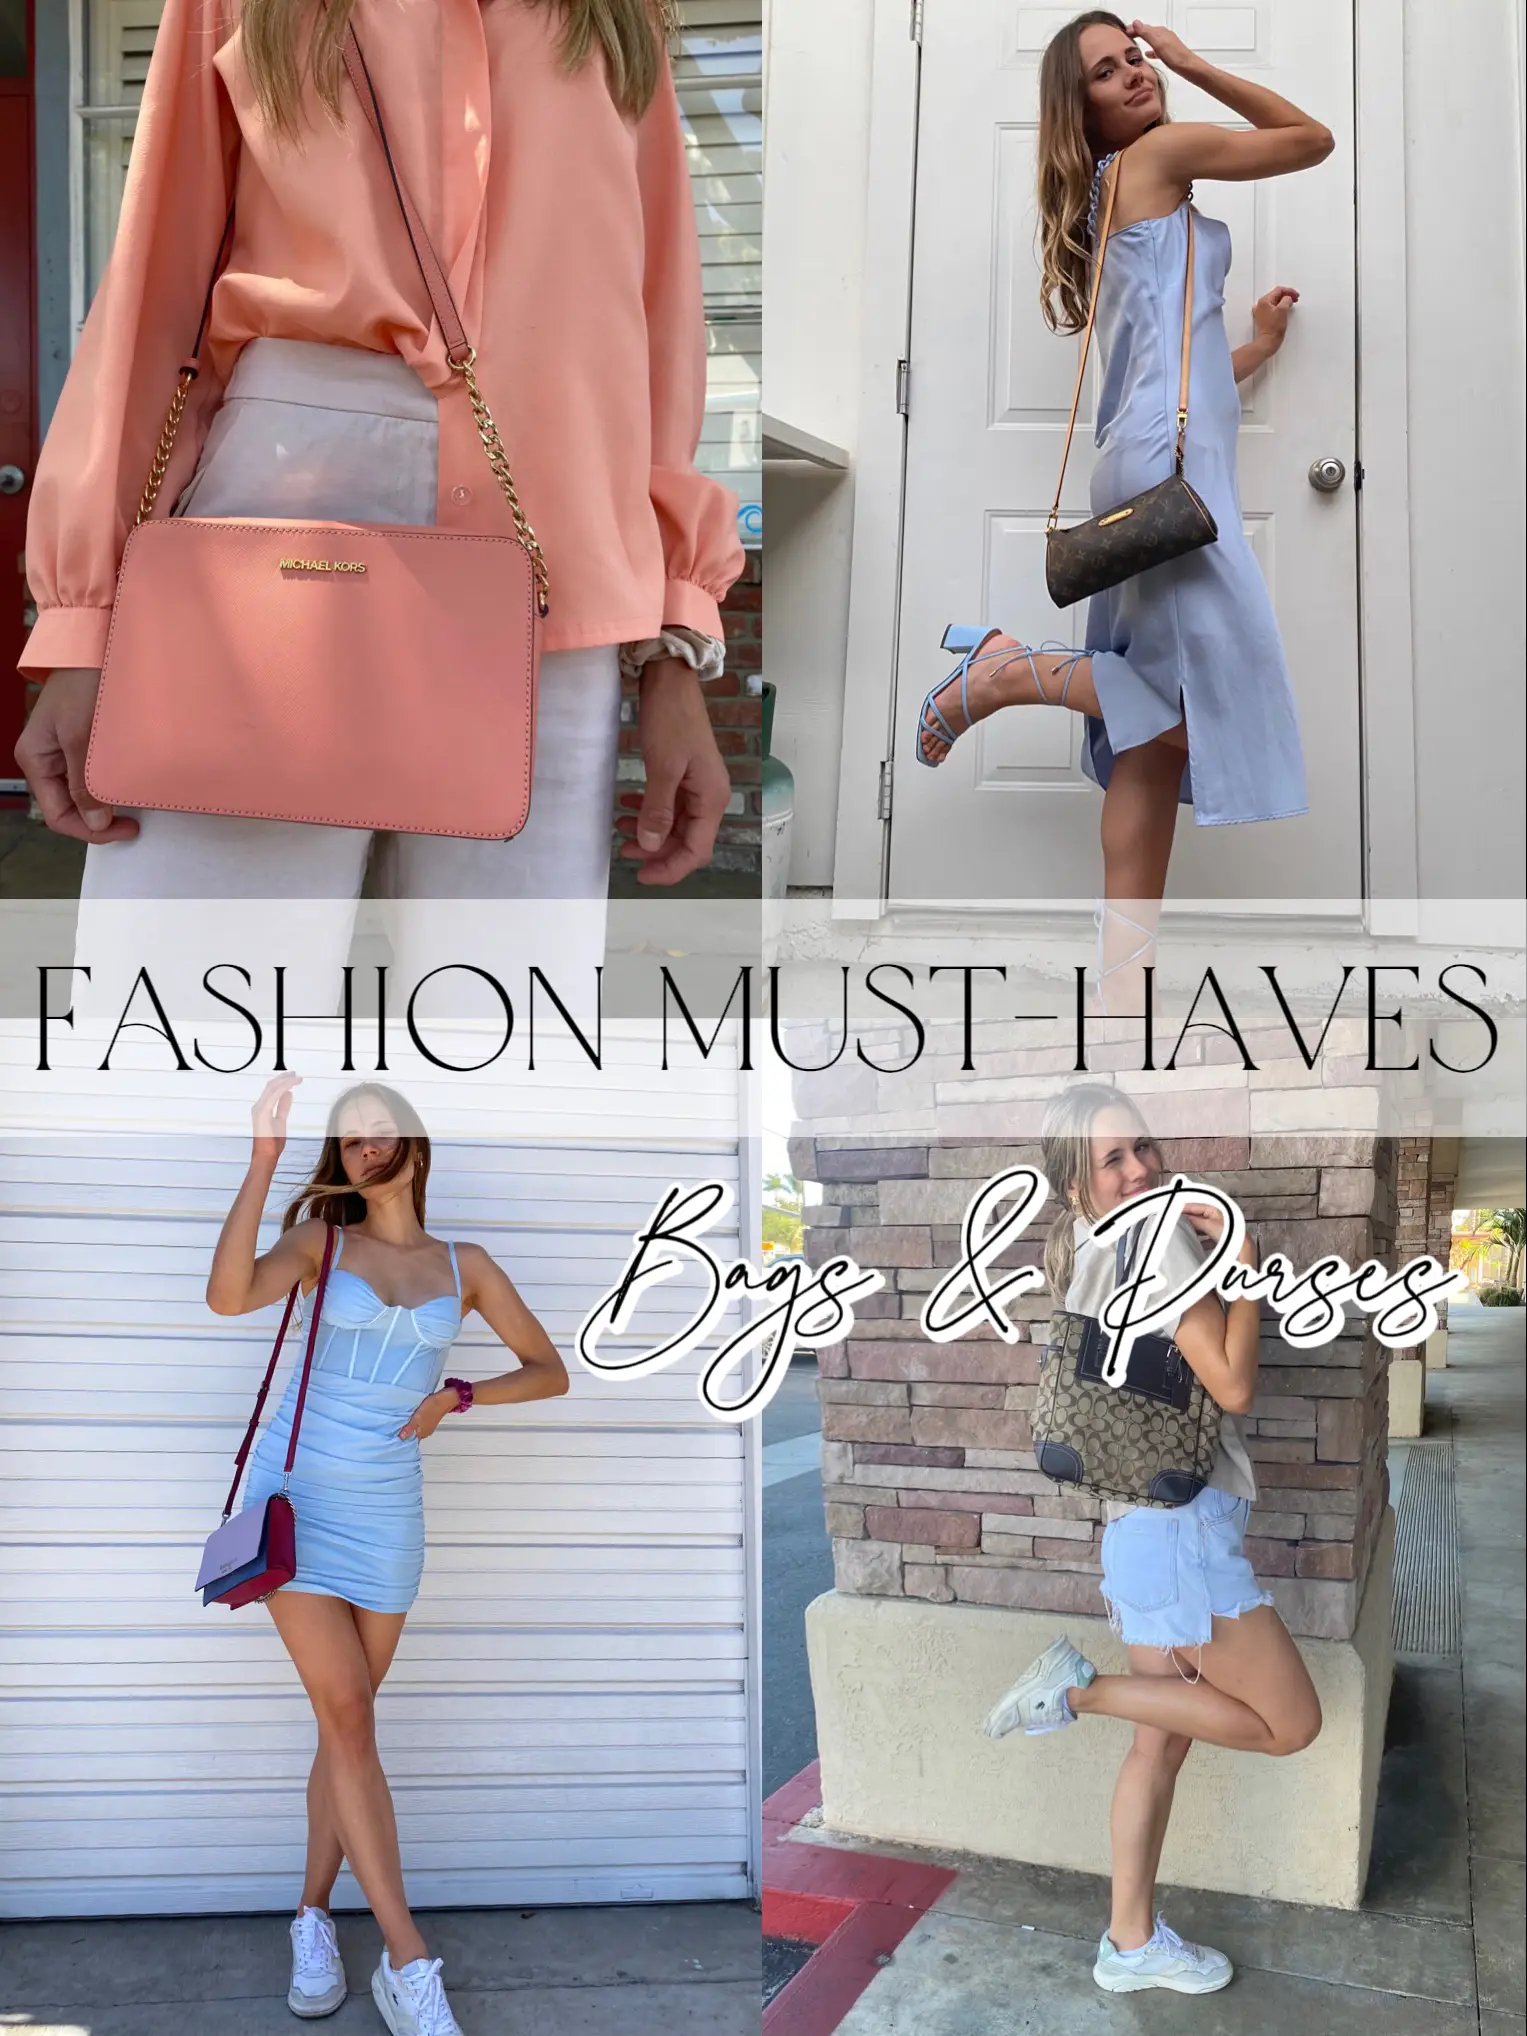 Cute Outfit Ideas for Fall That are Relaxed - A Jetset Journal